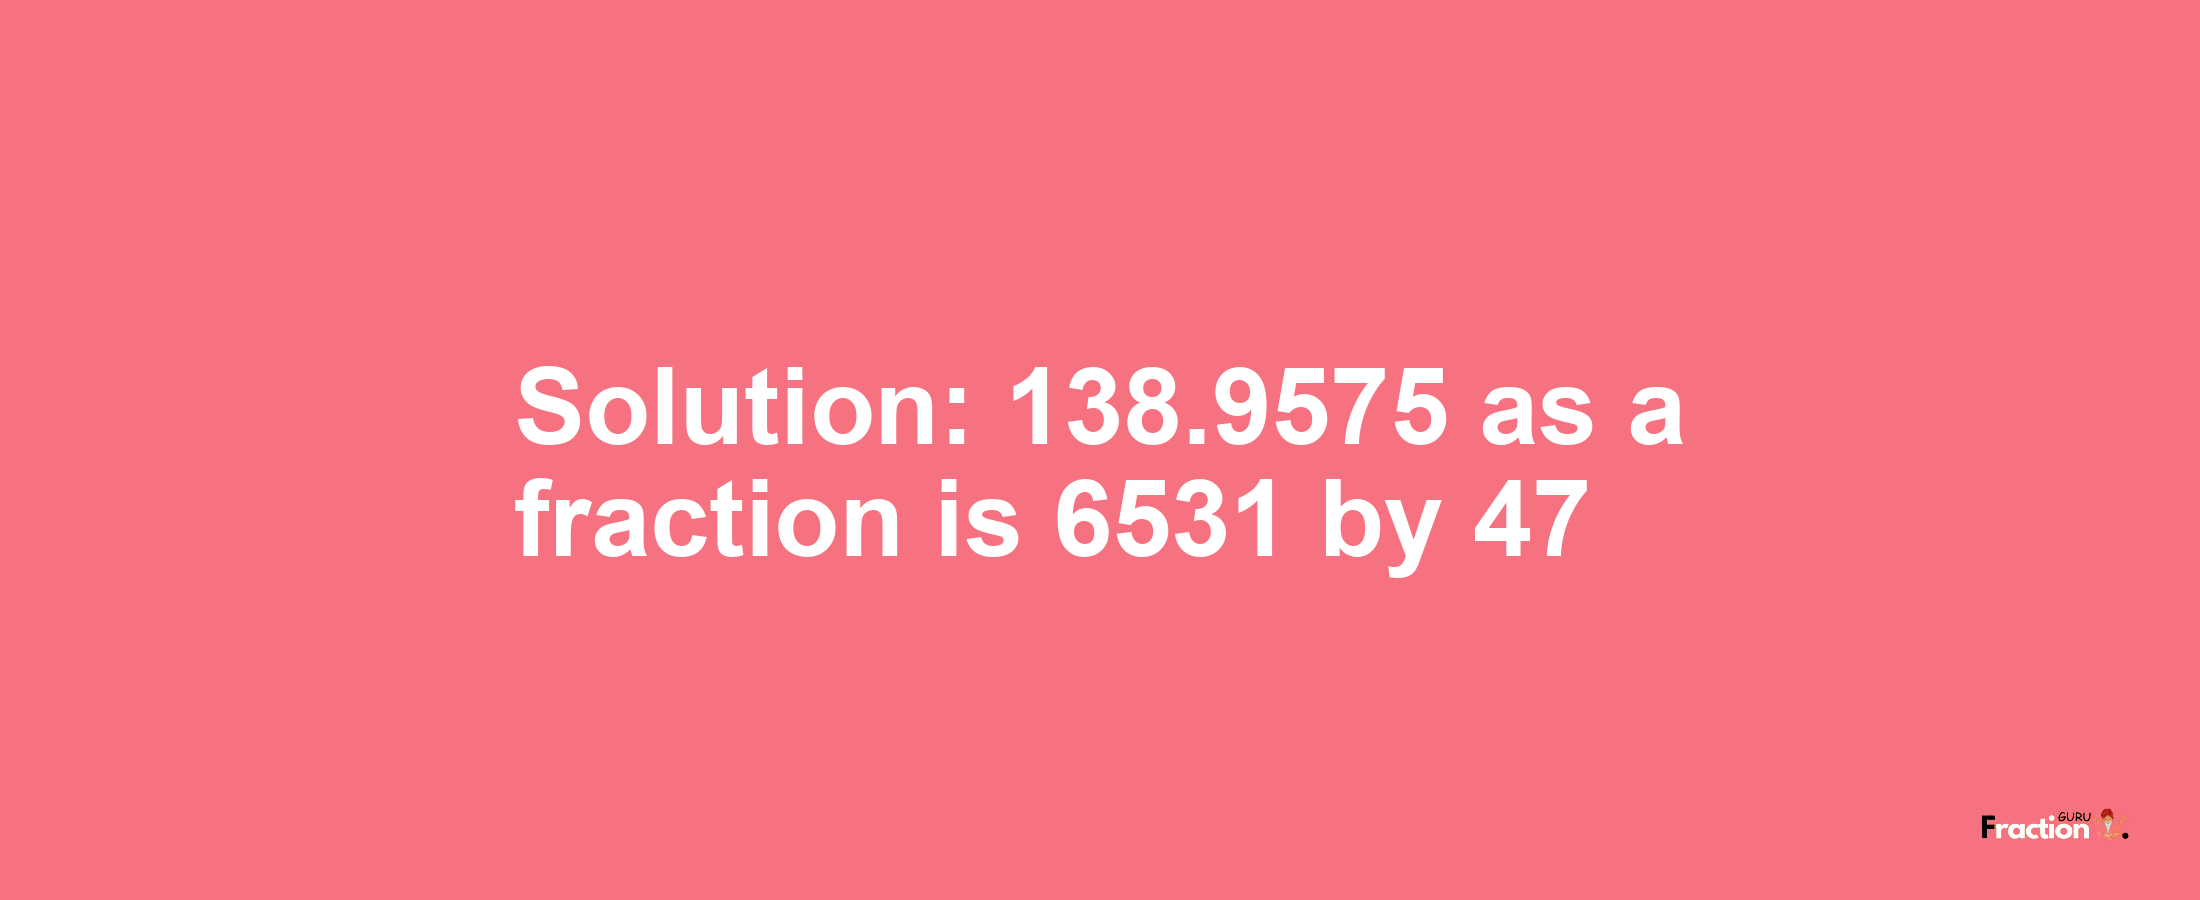 Solution:138.9575 as a fraction is 6531/47